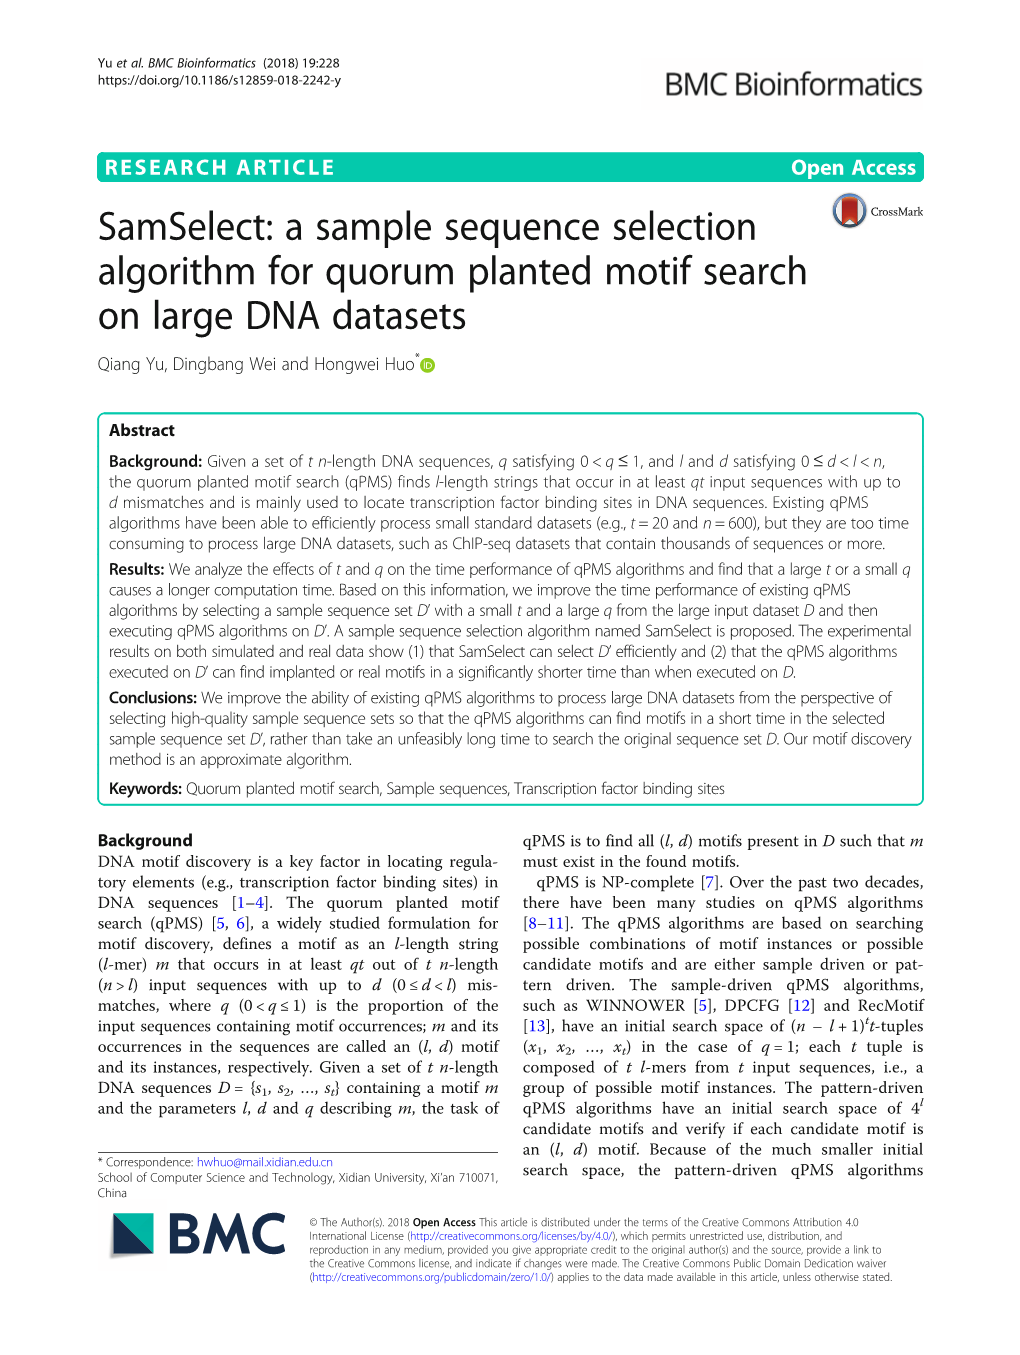 A Sample Sequence Selection Algorithm for Quorum Planted Motif Search on Large DNA Datasets Qiang Yu, Dingbang Wei and Hongwei Huo*